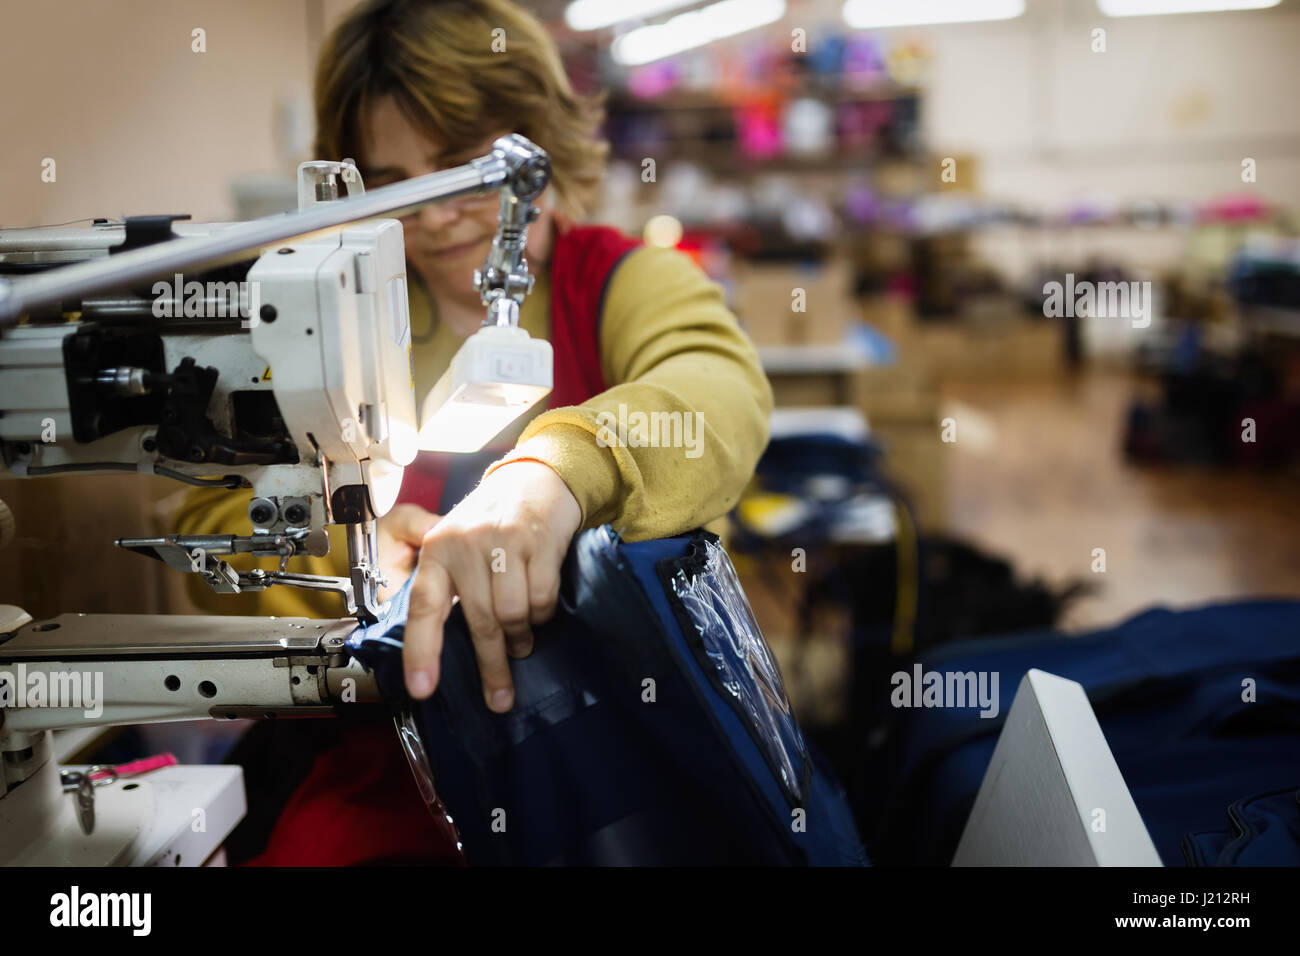 Woman working in sewing industry on machine Stock Photo